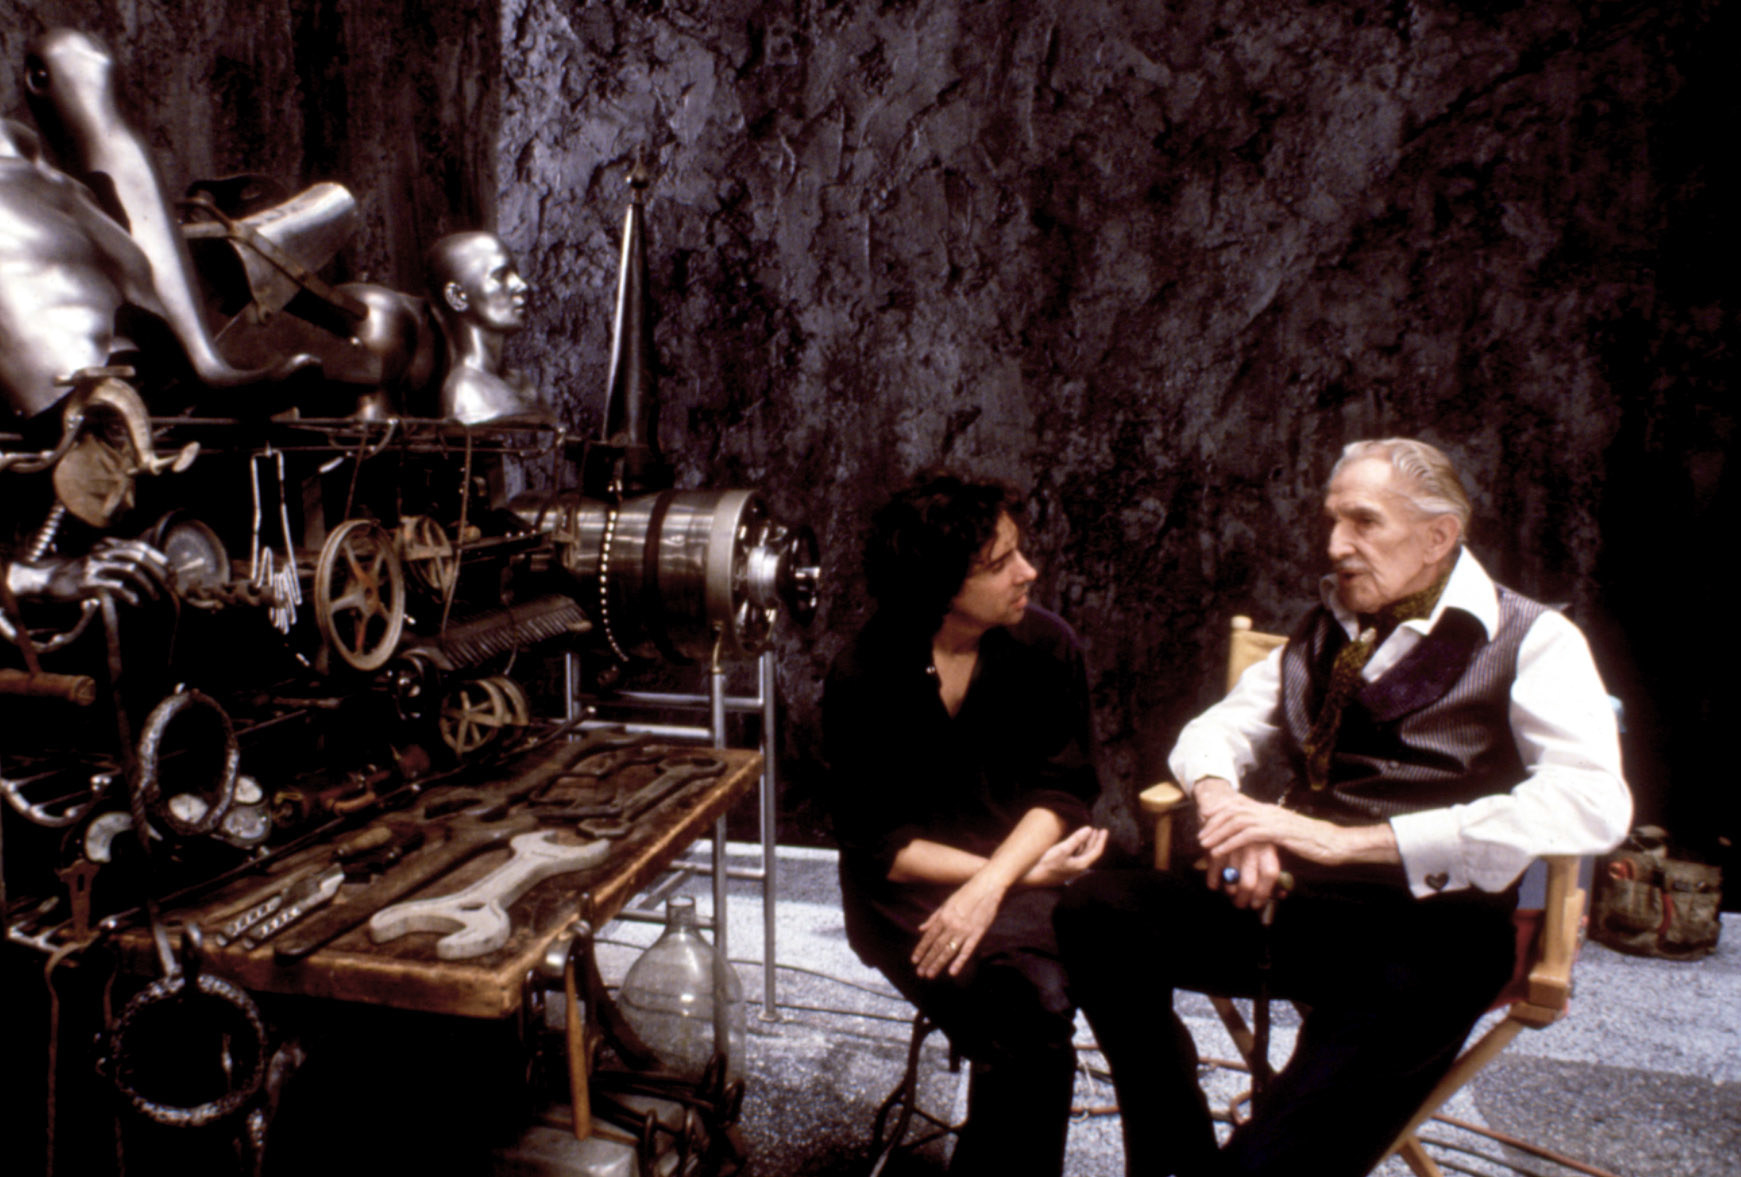 Tim Burton discusses a scene with Vincent Price during production